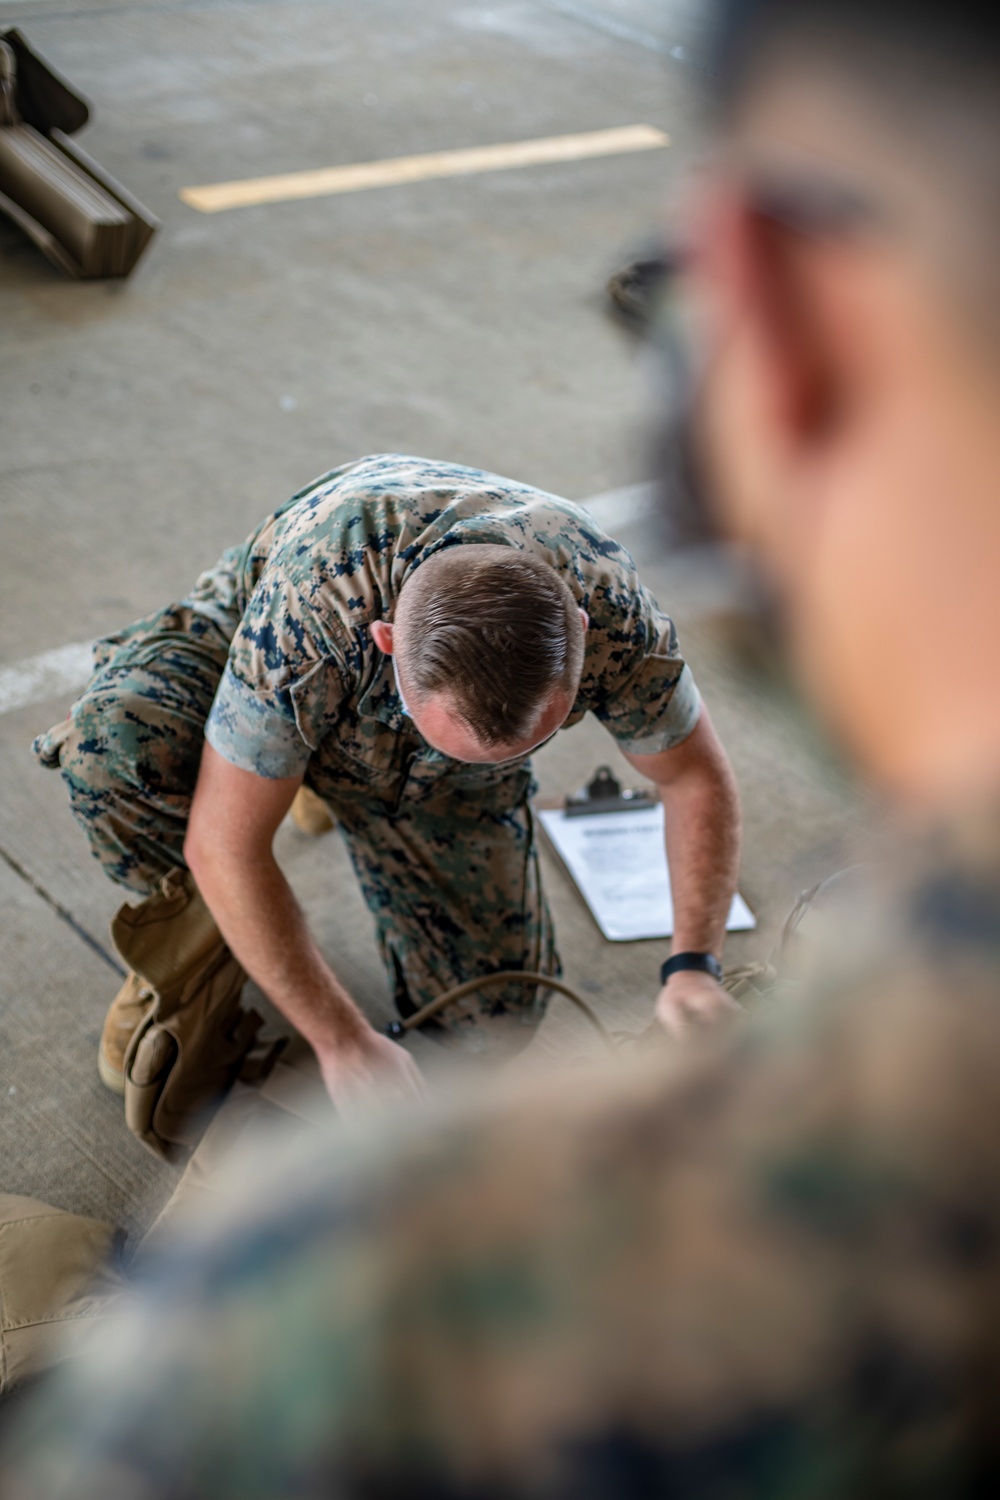 Task force Marines, Sailors prepare for deployment through strategic mobility exercise